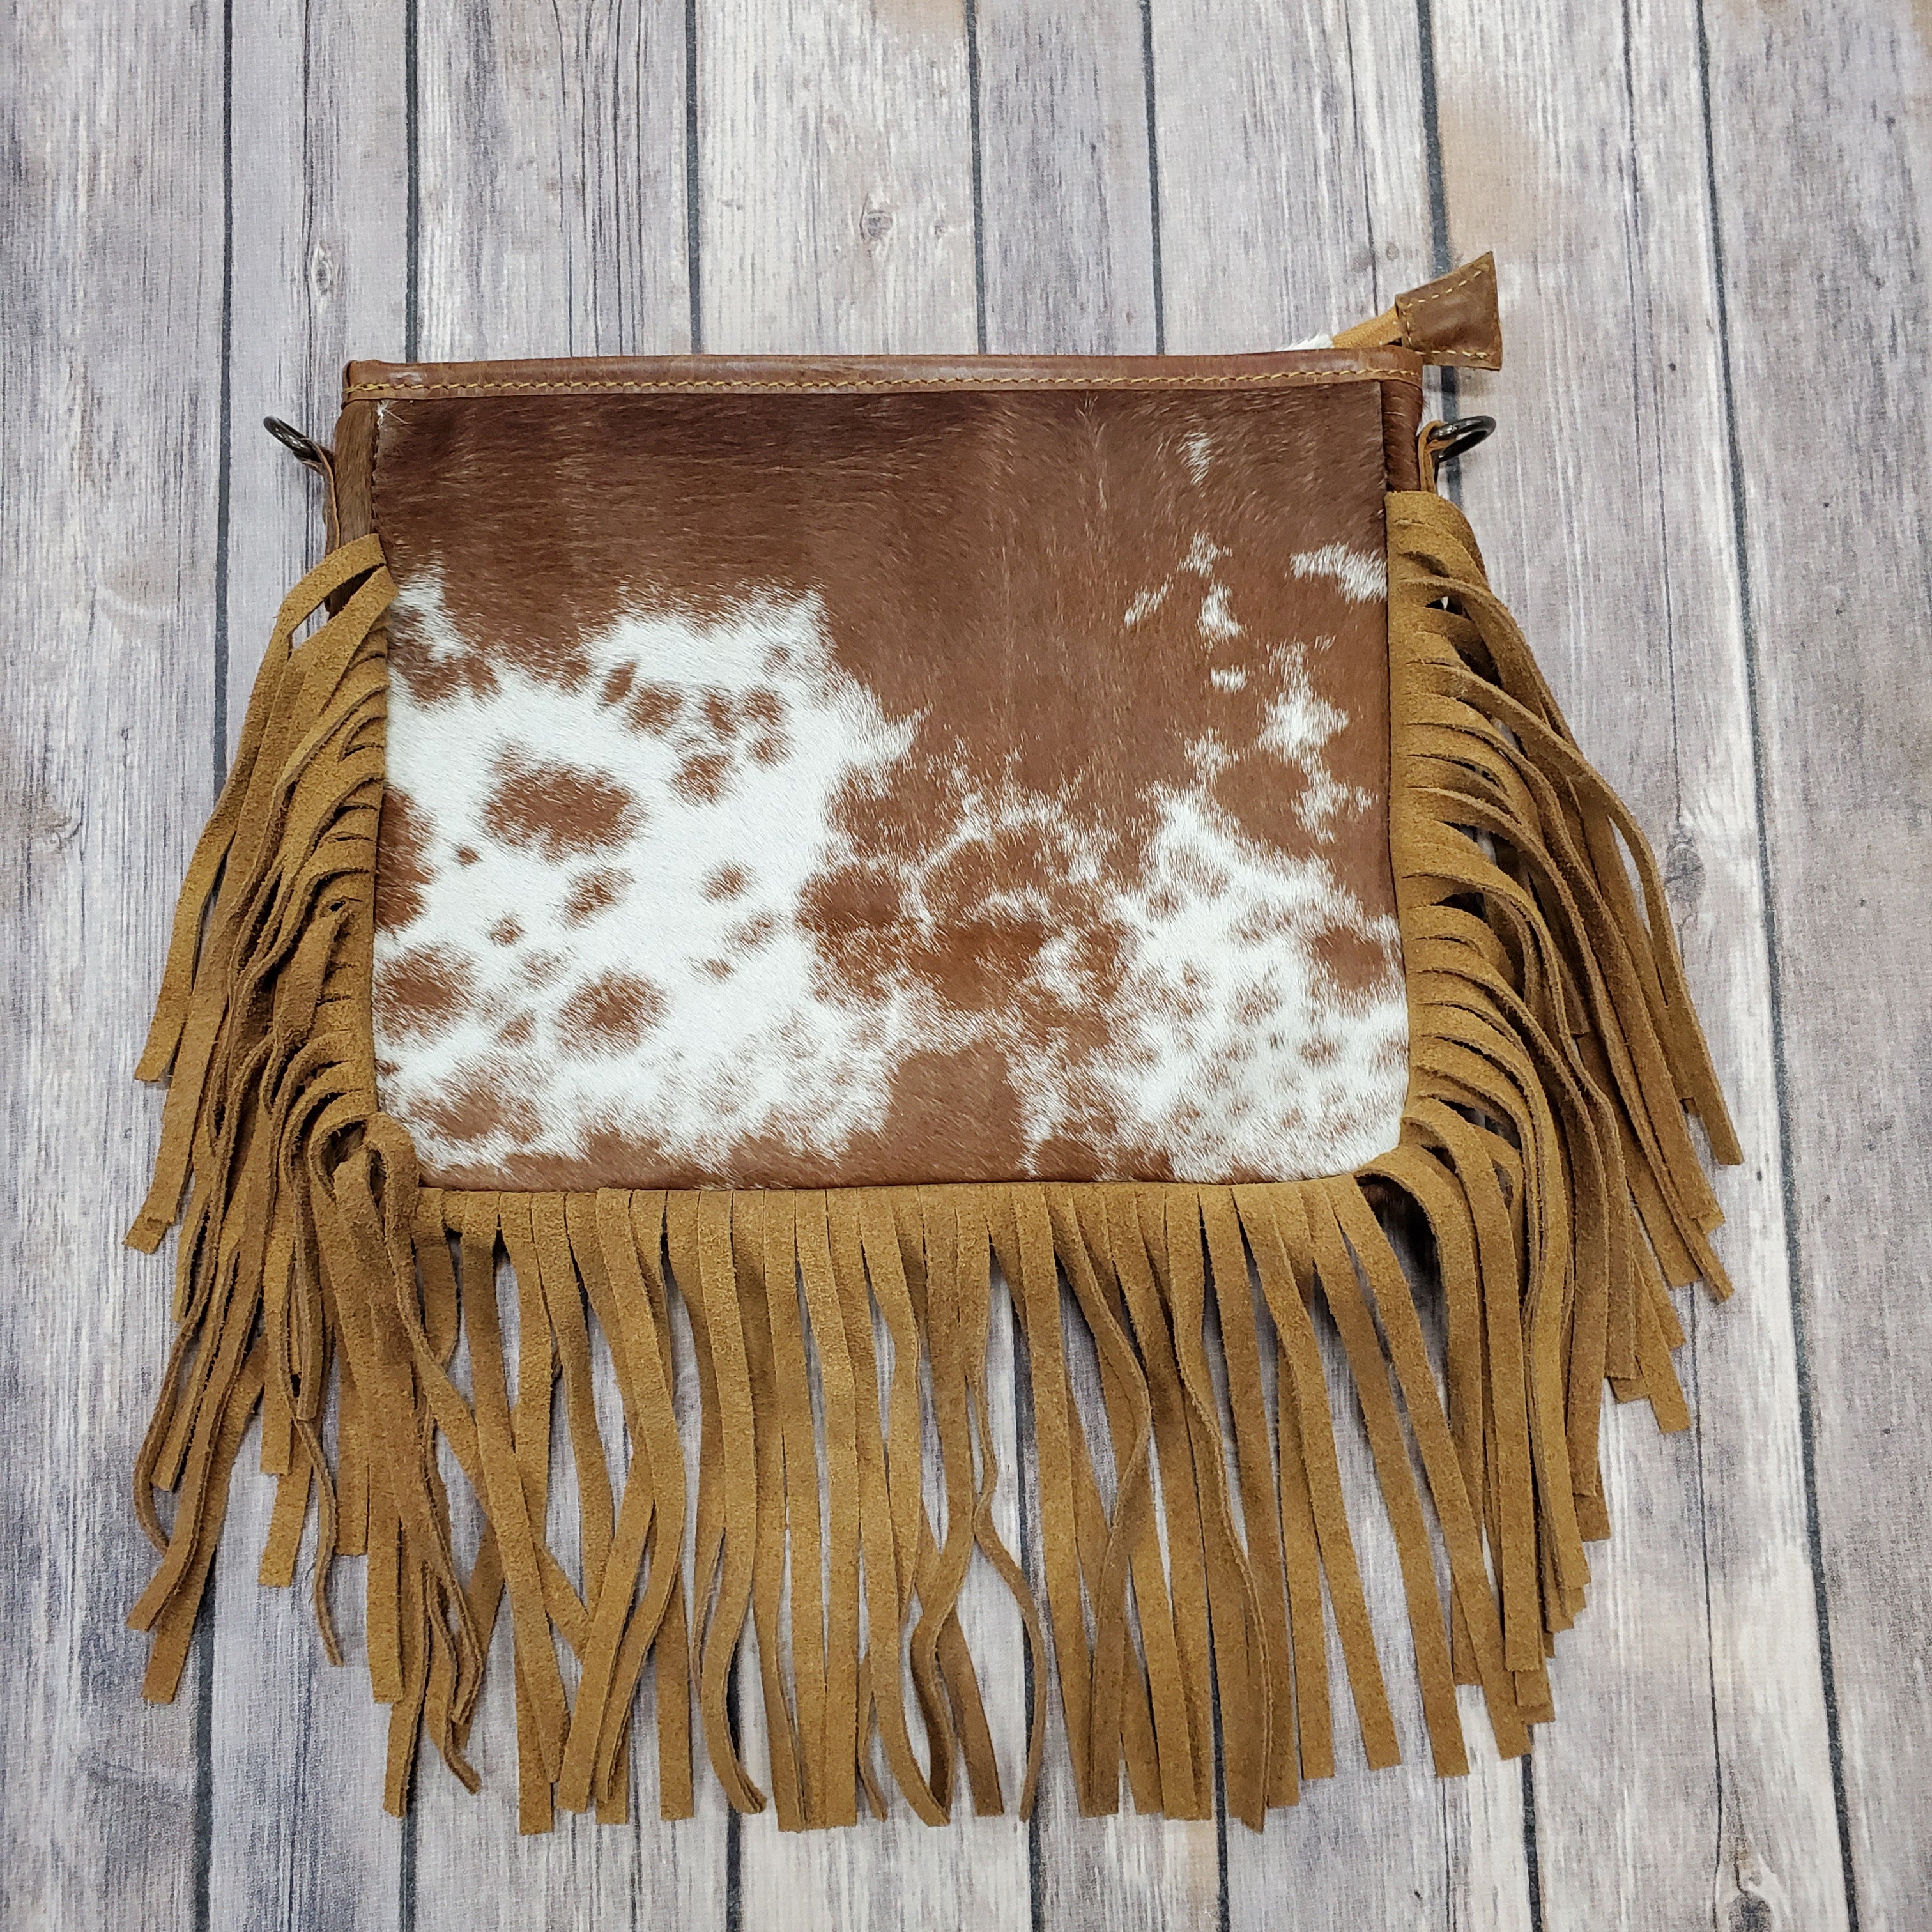 Leather American Flag Purse with Fringe